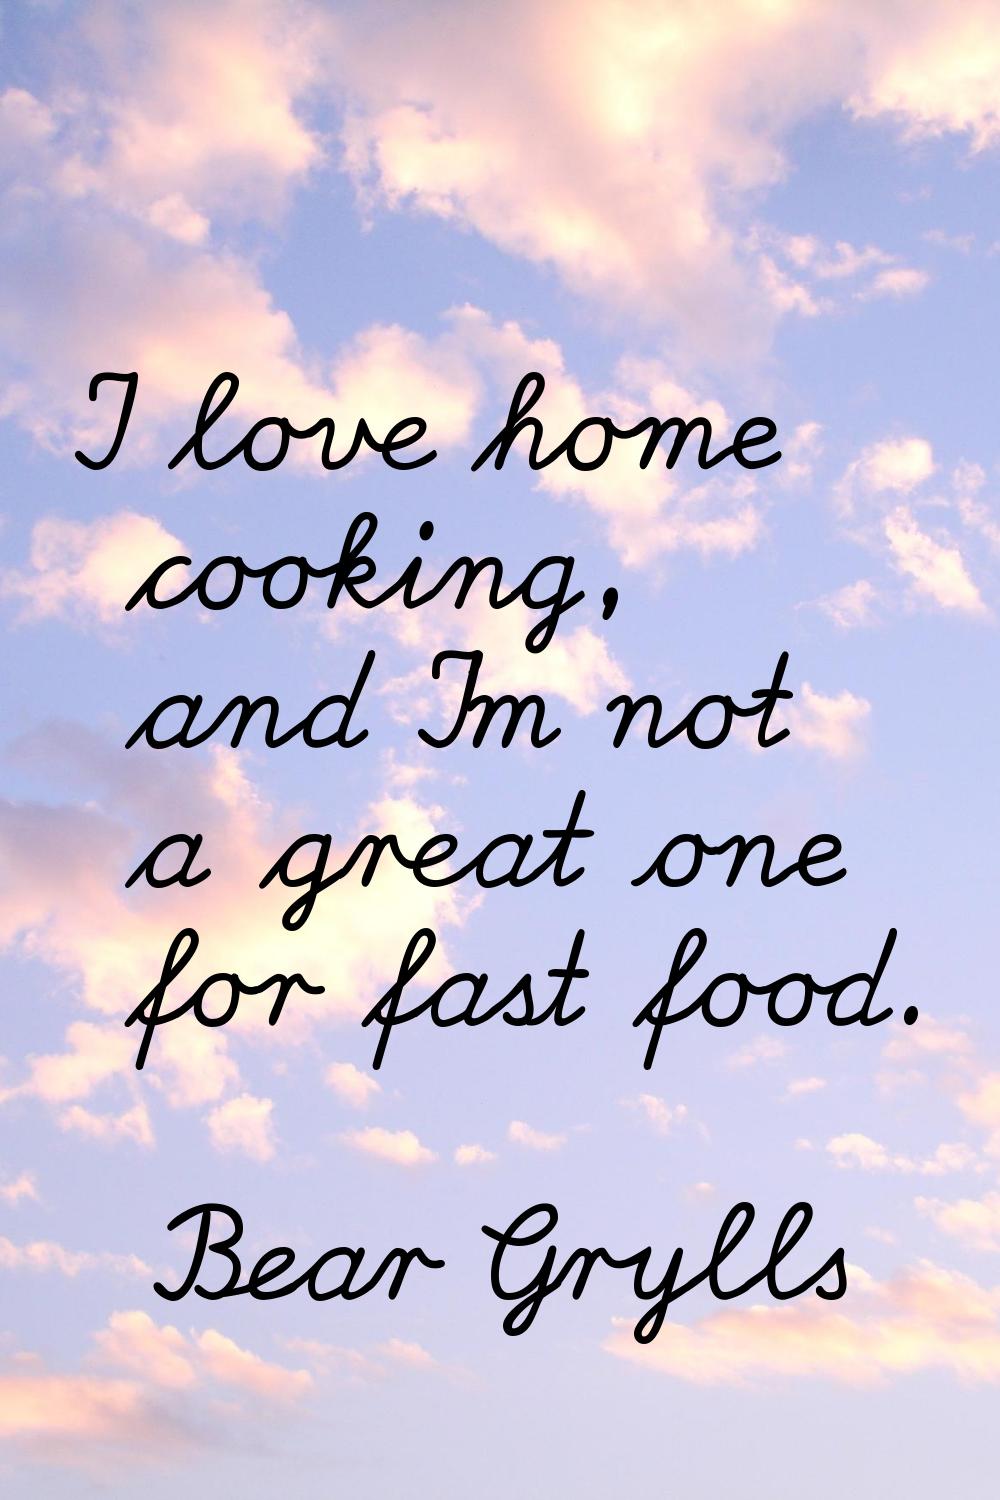 I love home cooking, and I'm not a great one for fast food.